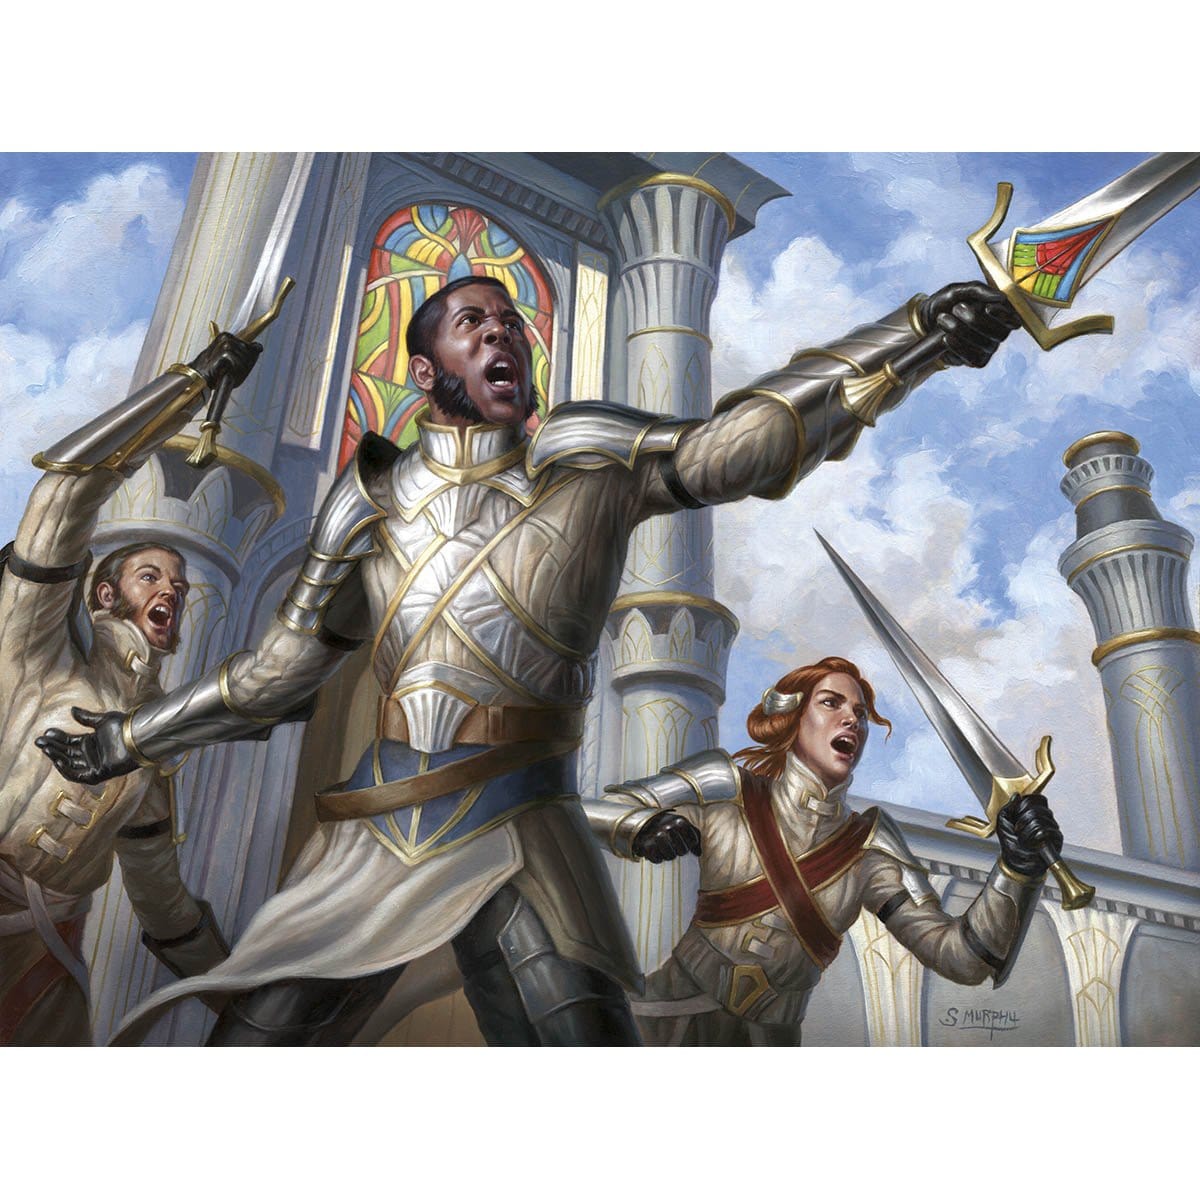 Sergeant-at-Arms Print - Print - Original Magic Art - Accessories for Magic the Gathering and other card games